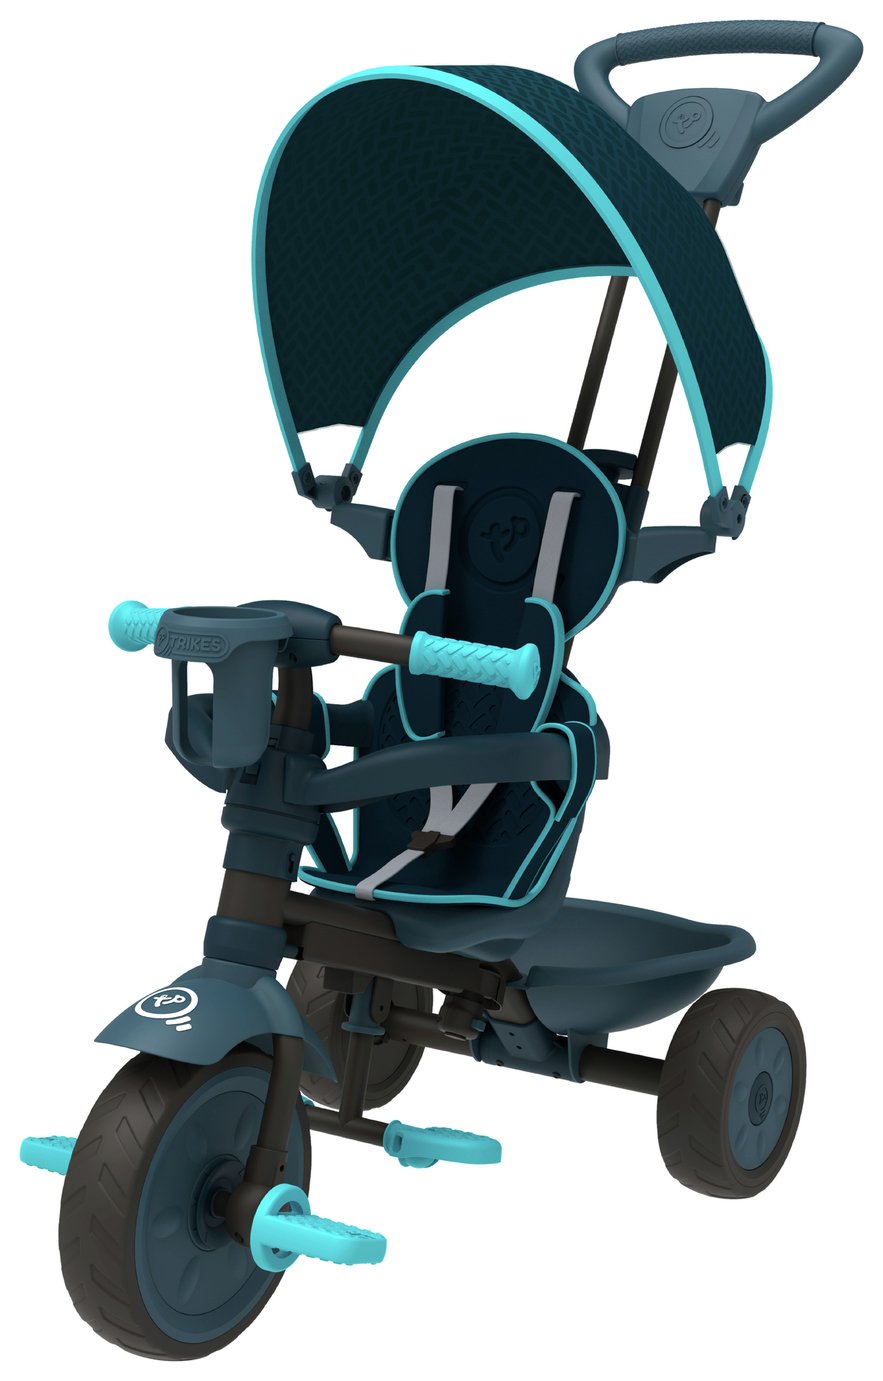 TP Trike 4 in 1 review